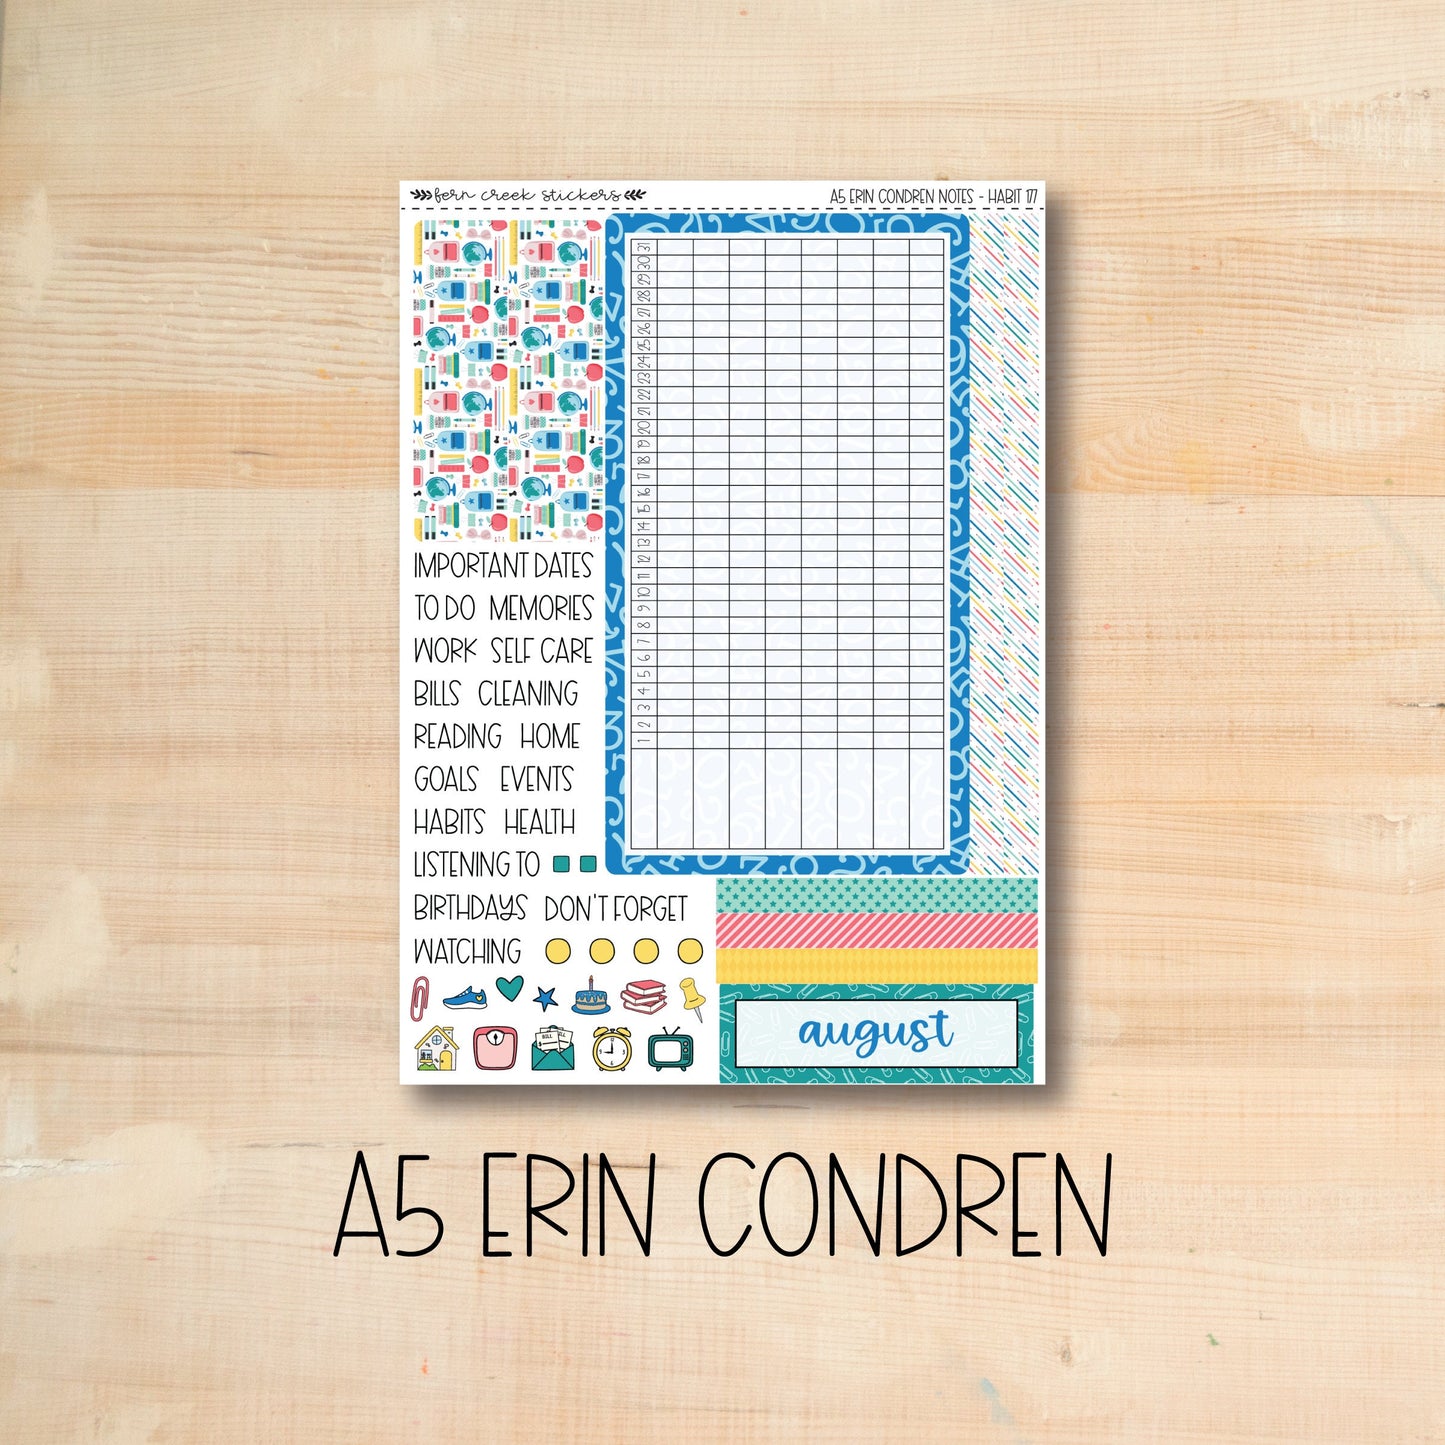 A5 NOTES-177 || BACK To SCHOOL A5 Erin Condren August notes page kit